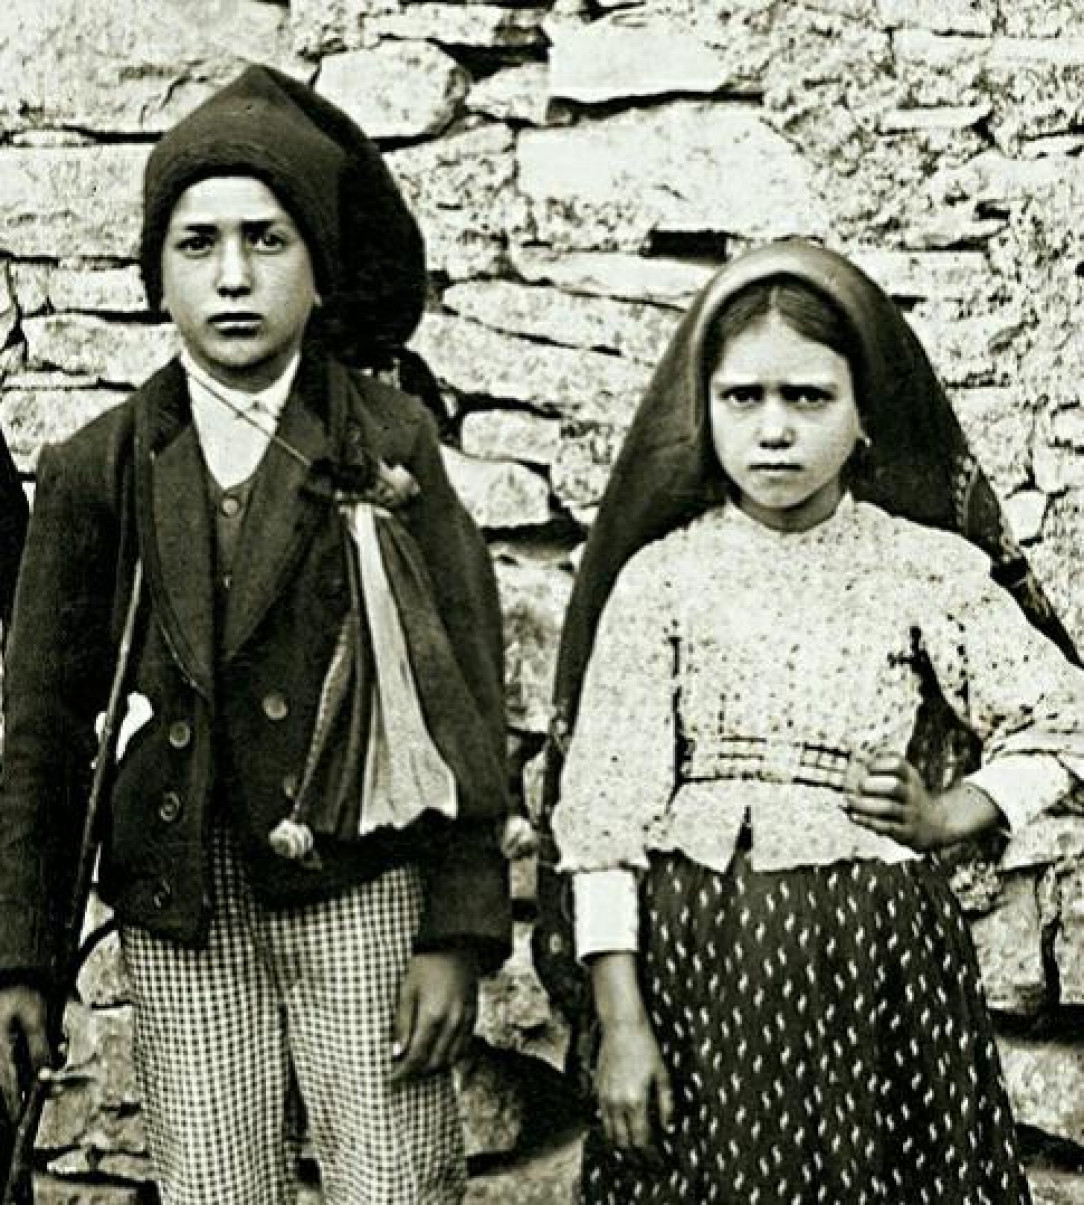 Saint Francisco and Jacinta Marto, two of the visionary children of Fatima who received the apparitions of Our Lady and the Angel of Portugal